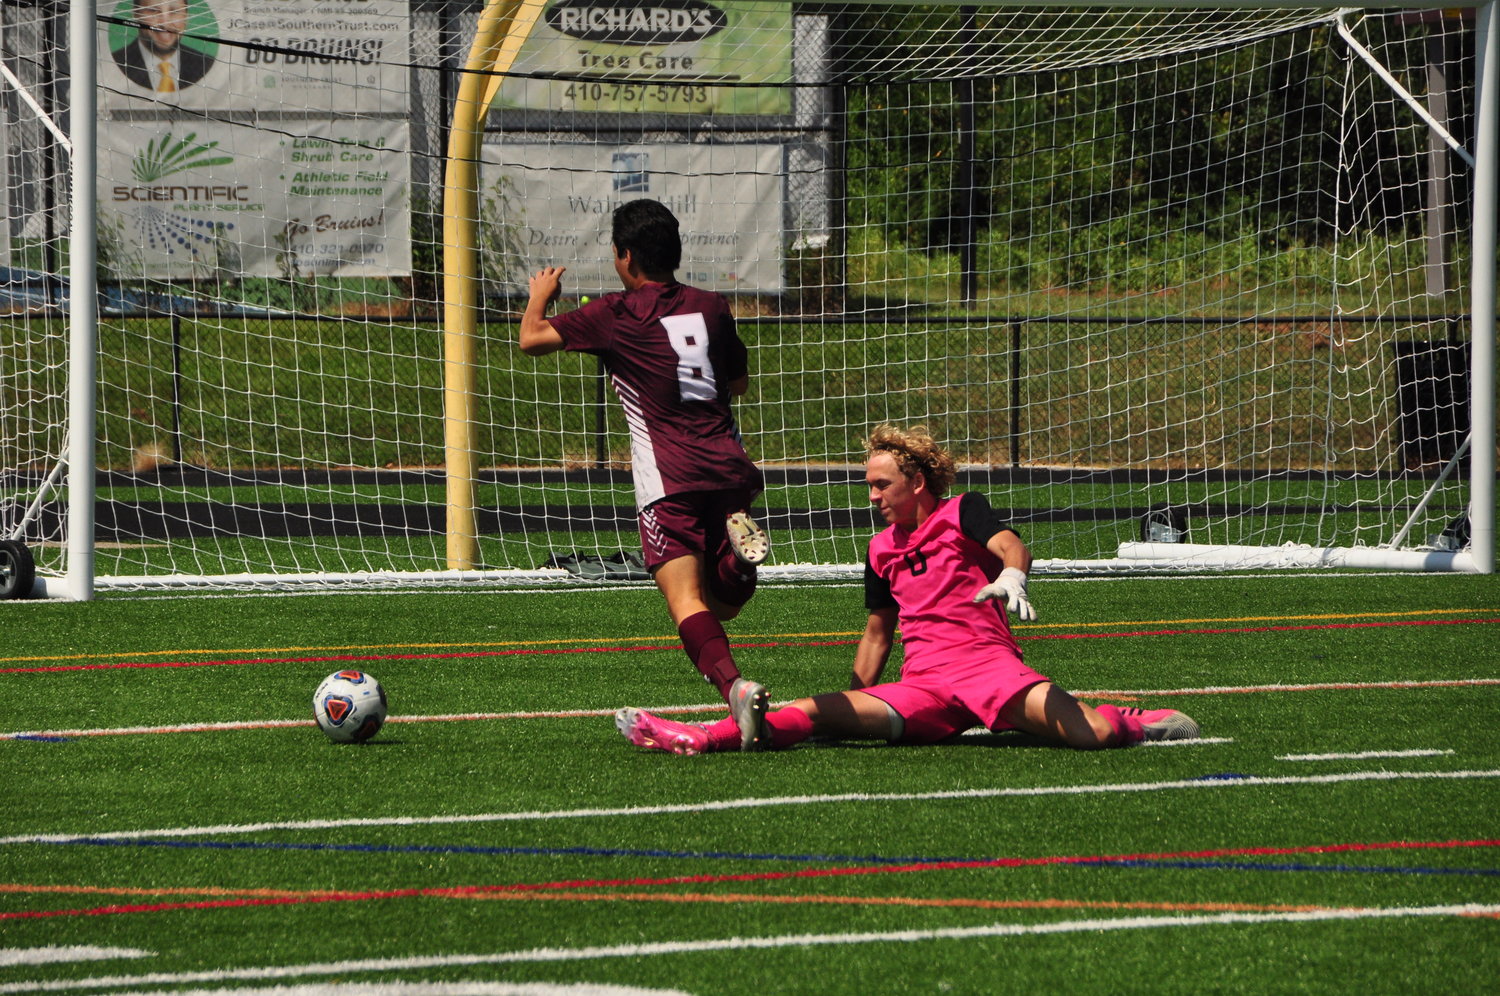 Sam Myers dodged past the North Caroline goalie and scored an easy goal.